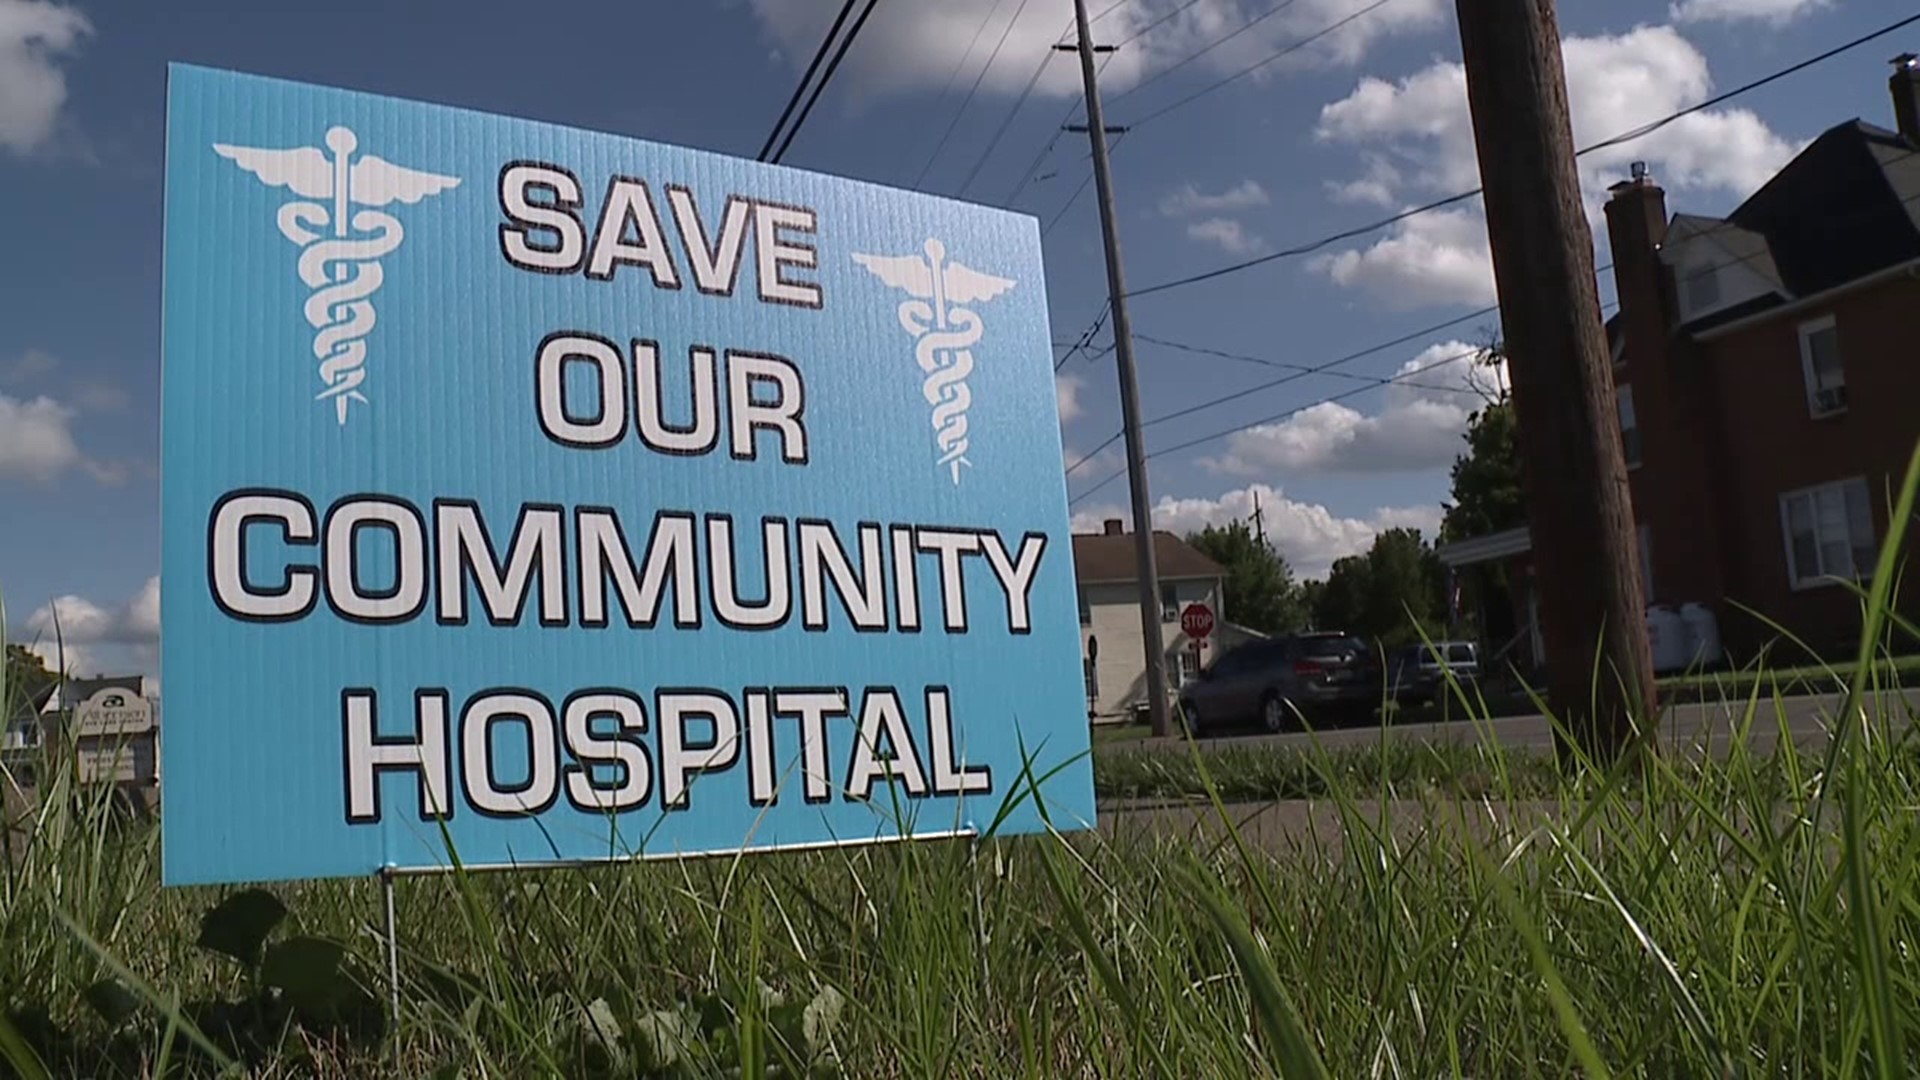 A new report filed in bankruptcy court sheds more light on the situation after the sudden closure of several health care clinics in the Berwick area.